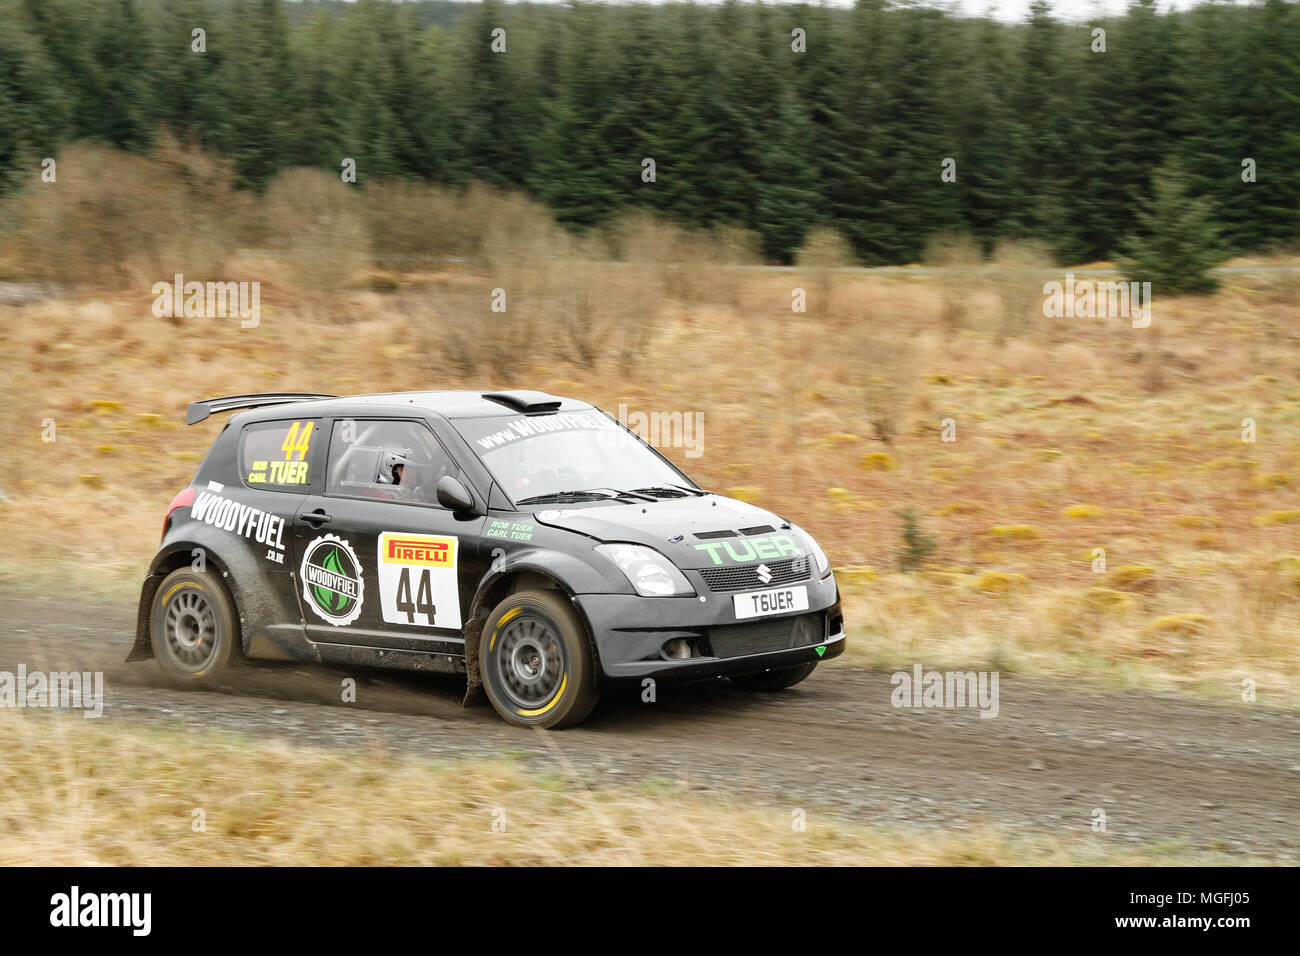 Kielder Forest, Northumberland, UK, 28 April 2018. Rally drivers compete in the Pirelli International Rally and the FUCHS Lubricant MSA British Historic Rally Championship. (Special Stage 1 - Pundershaw 1). Andrew Cheal/Alamy Live News Stock Photo